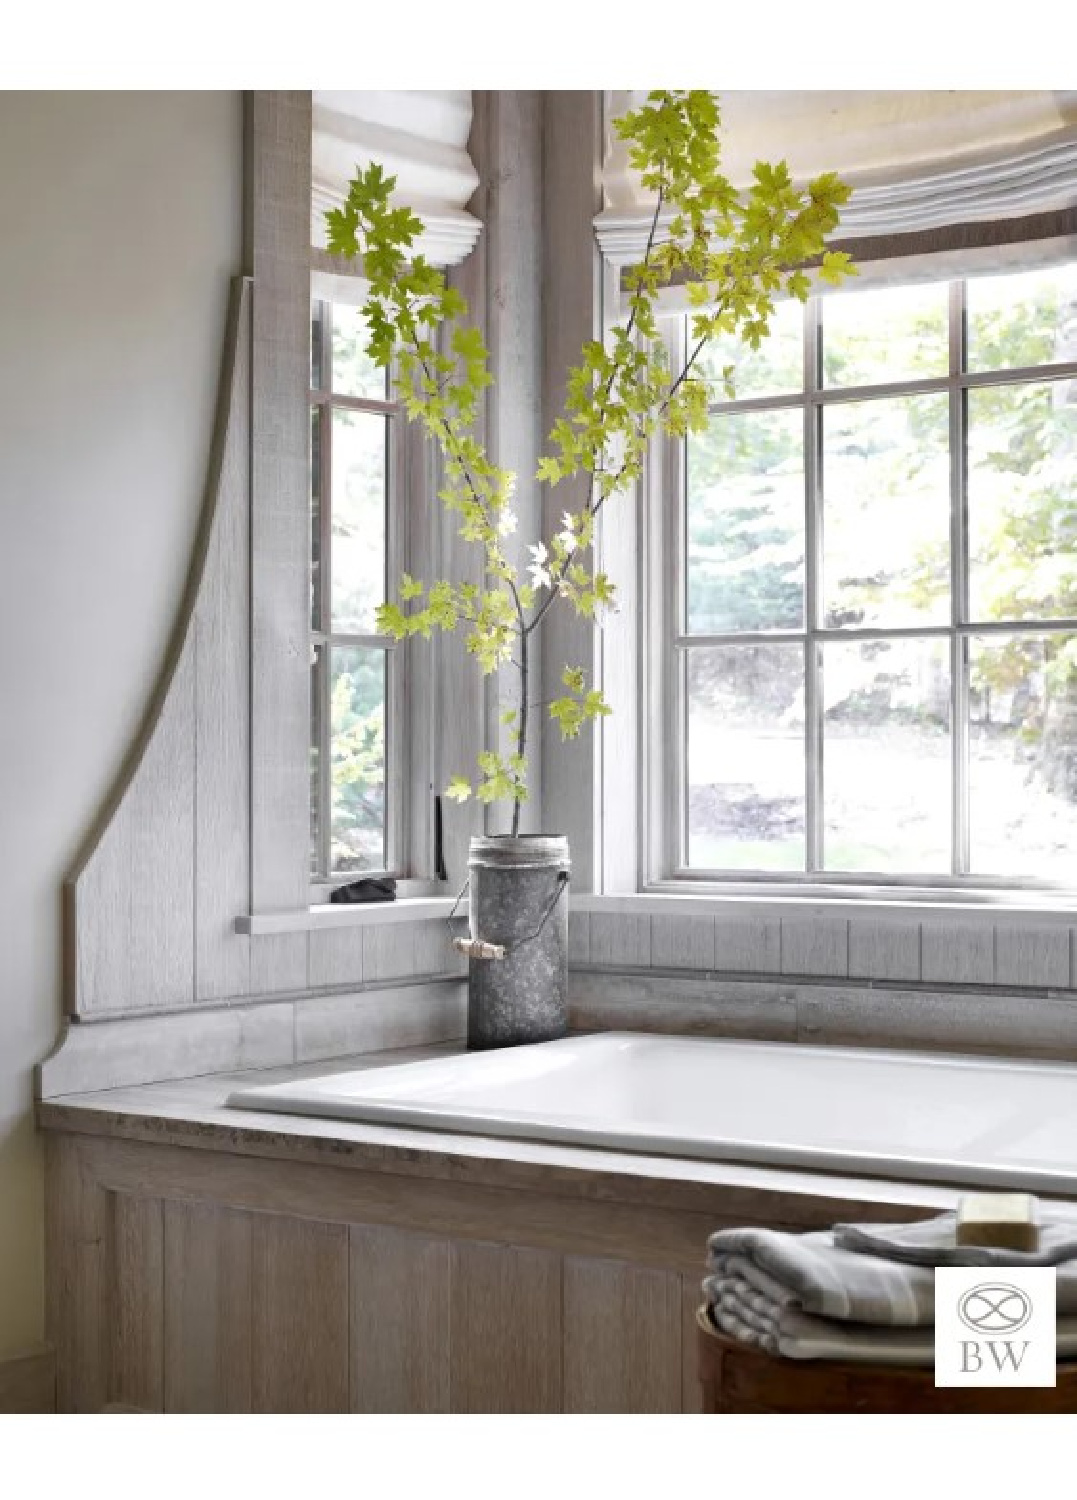 Beautiful detail in a bath with paneled wall - interior design from Beth Webb. #bethwebb #timelessinteriors